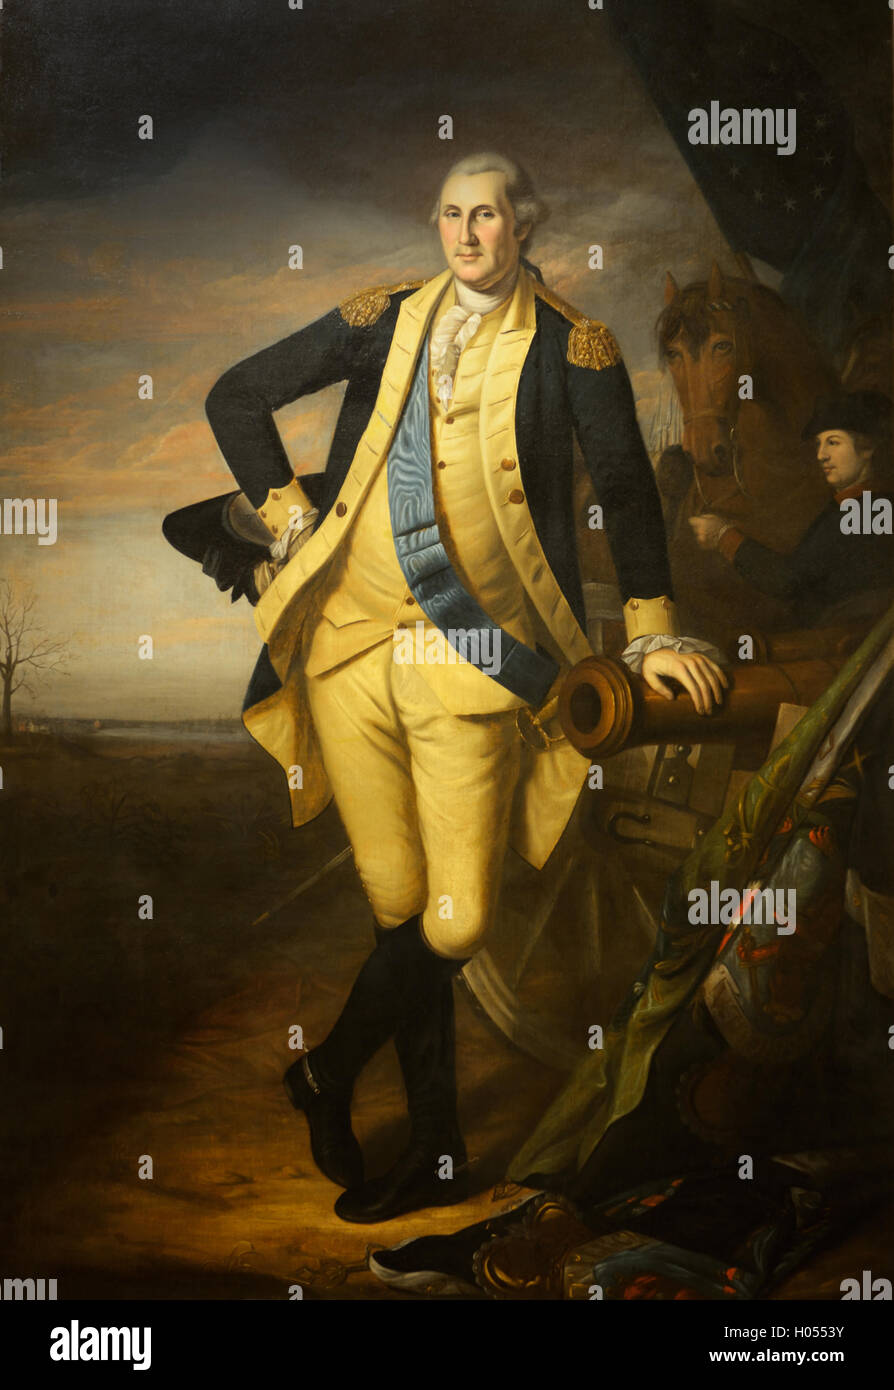 George Washington, Battle of Trenton, standing in military uniform, painted by Charles Wilson Peale ca 1779-1781 Stock Photo